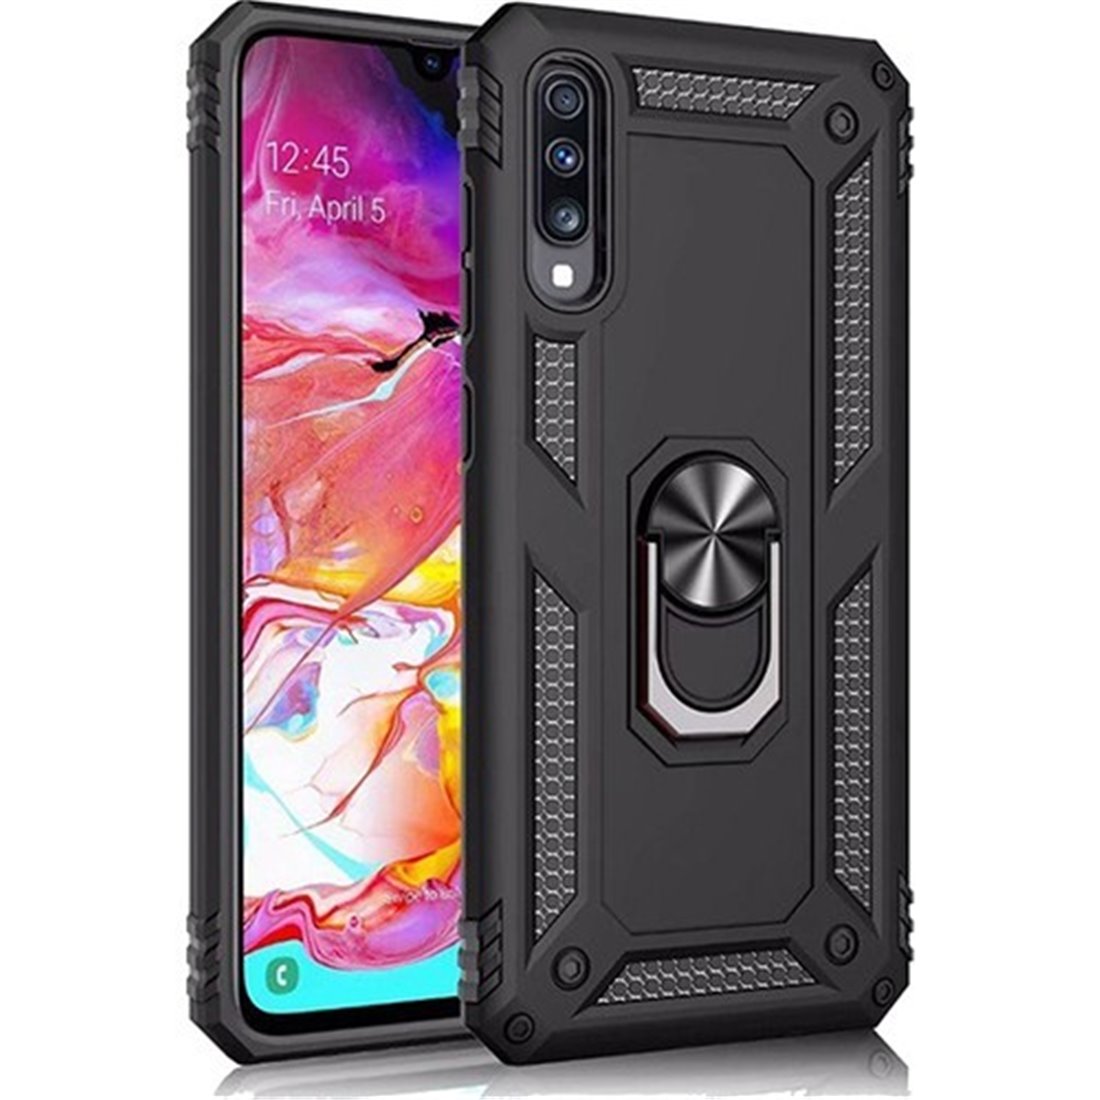 Samsung Galaxy A50 Plastic Black Back Cover - Solid ring